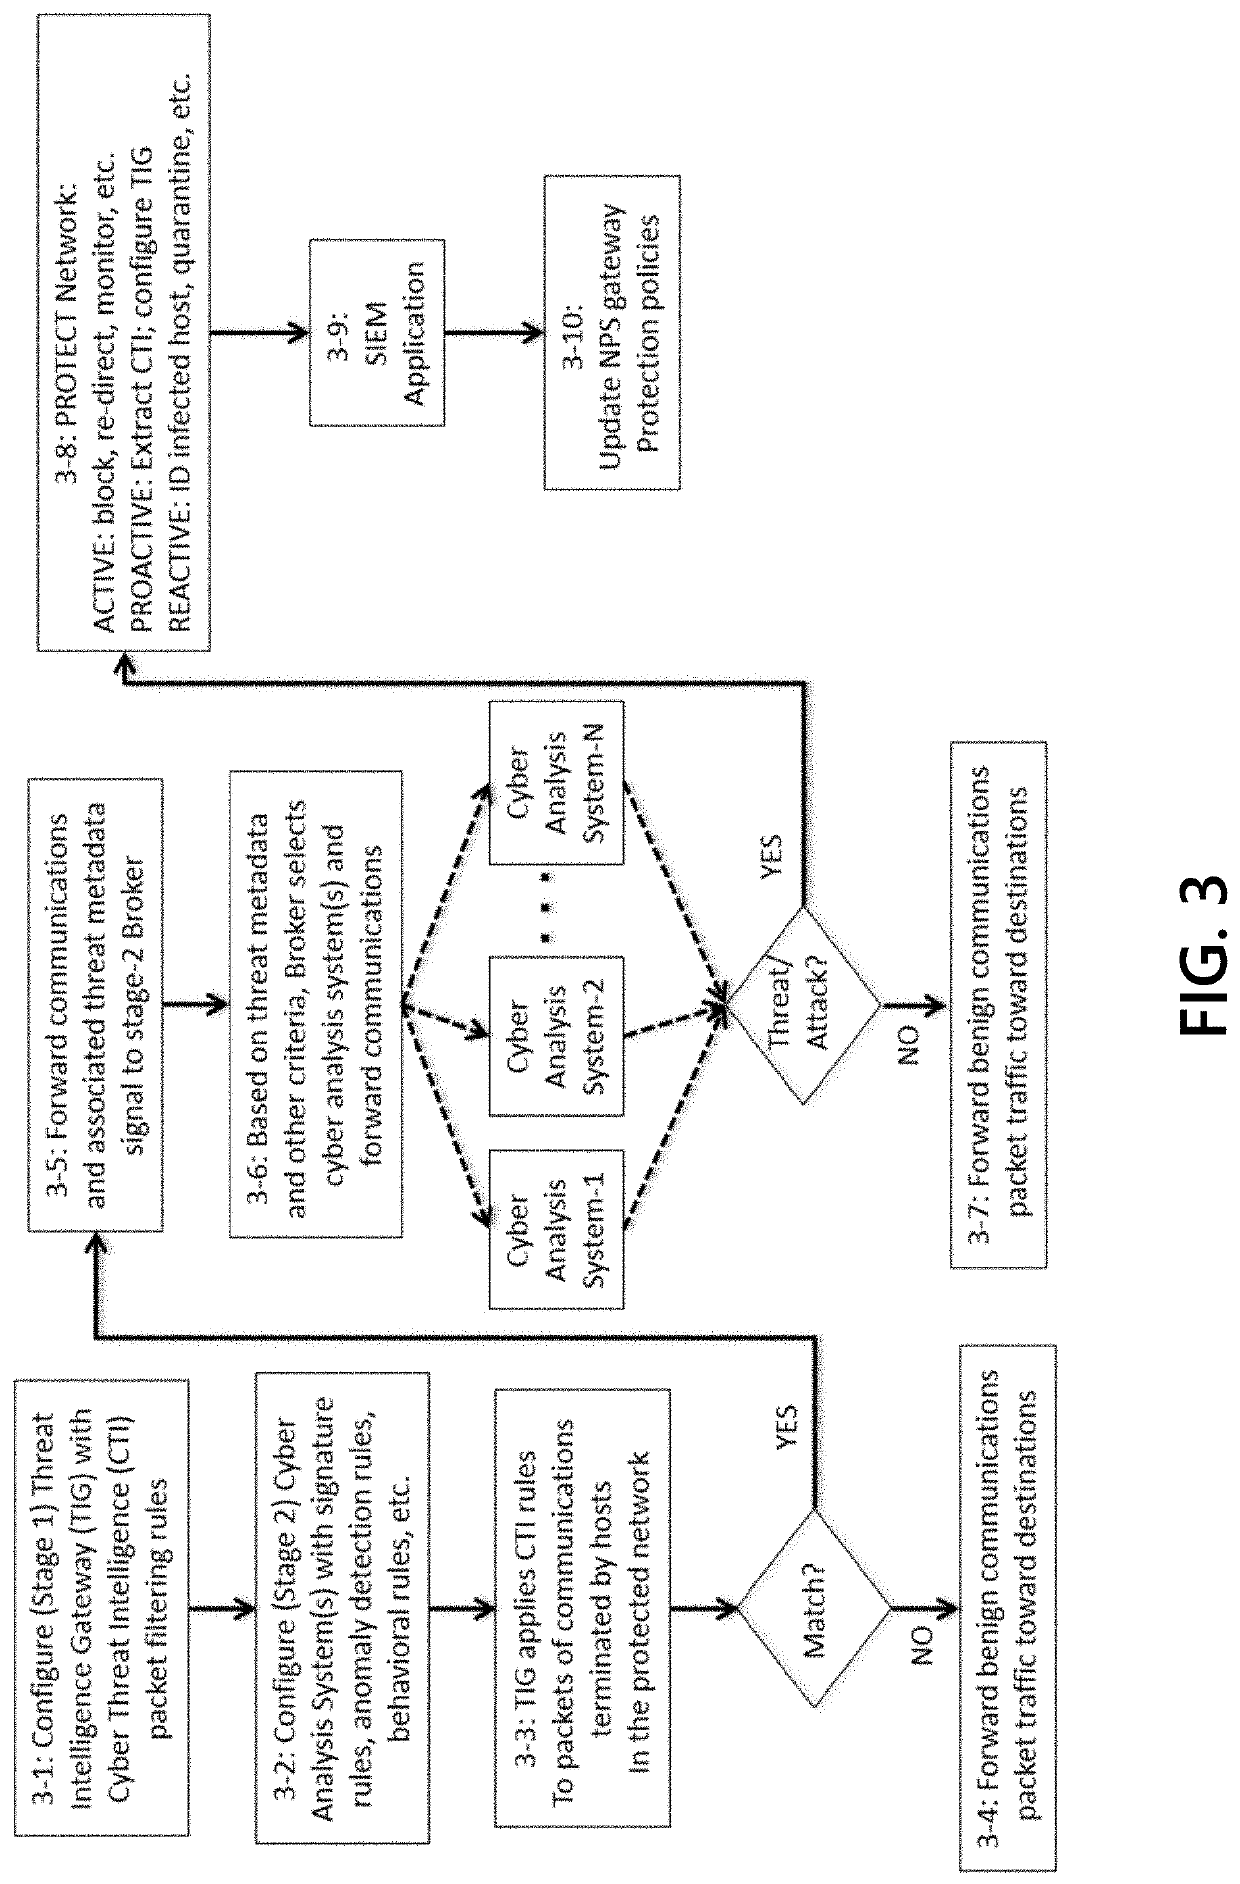 Methods and Systems for Efficient Network Protection